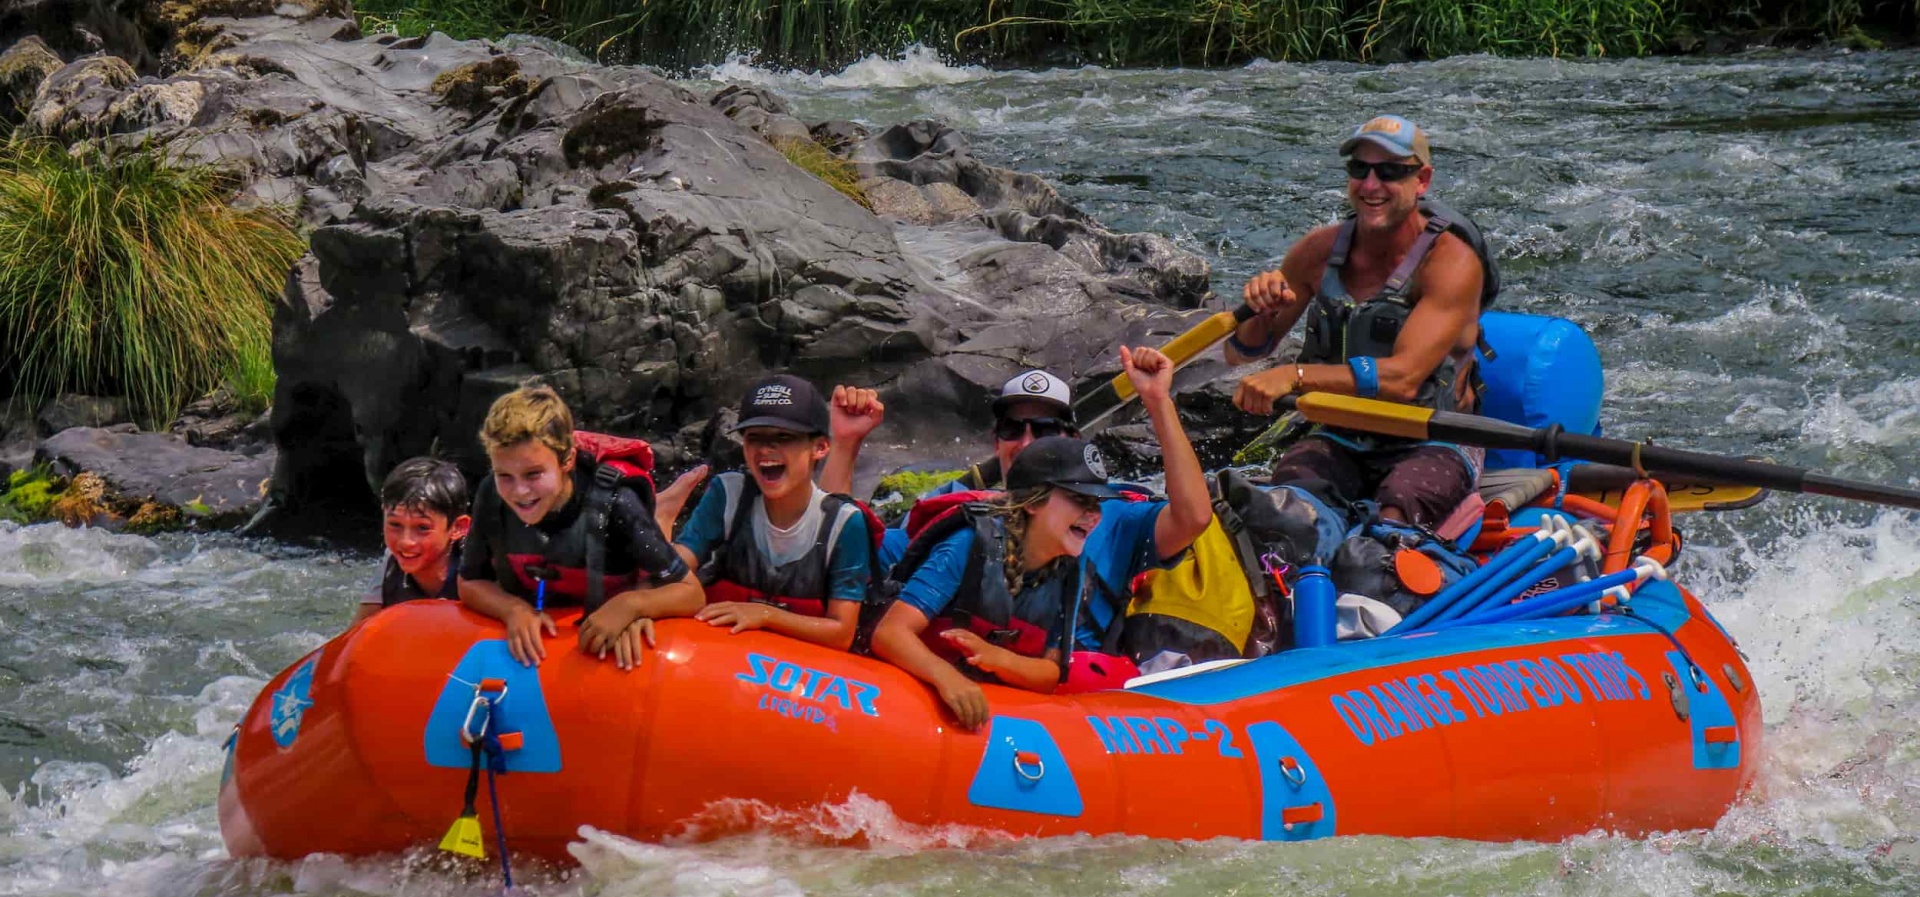 Kids group having fun whitewater rafting on the Rogue River